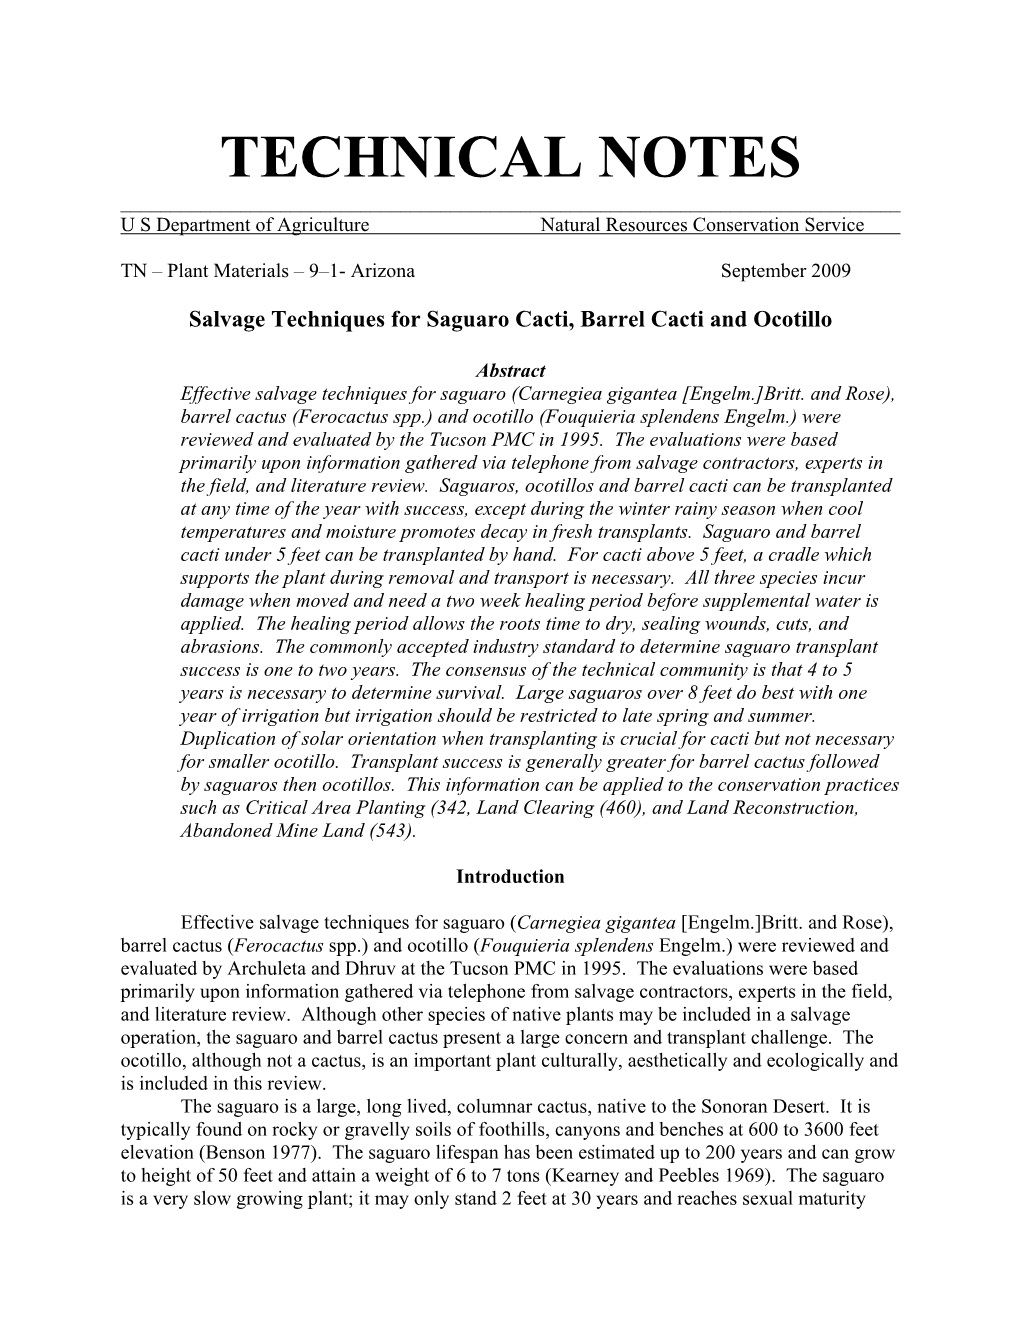 Technical Note: TN 9-1, Salvage Techniques for Saguaro Cacti